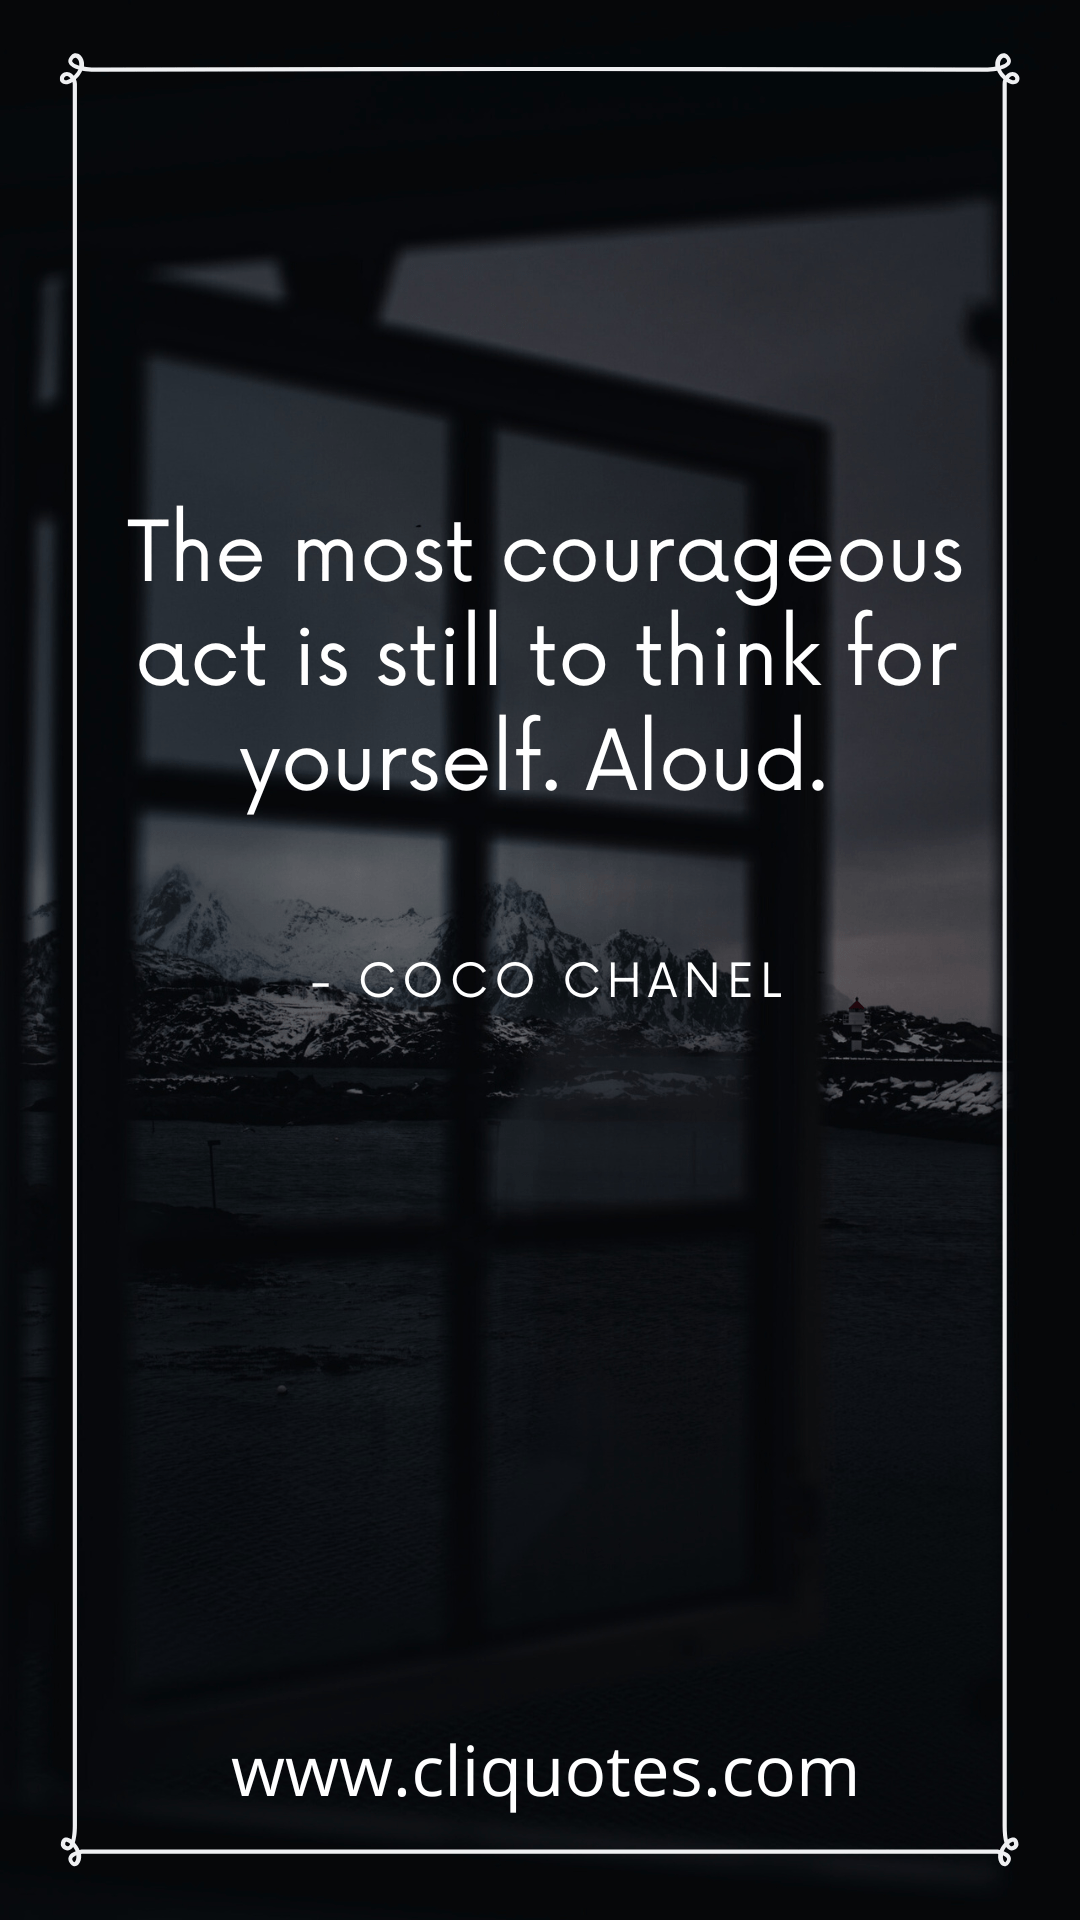 The most courageous act is still to think for yourself. Aloud. - Coco Chanel